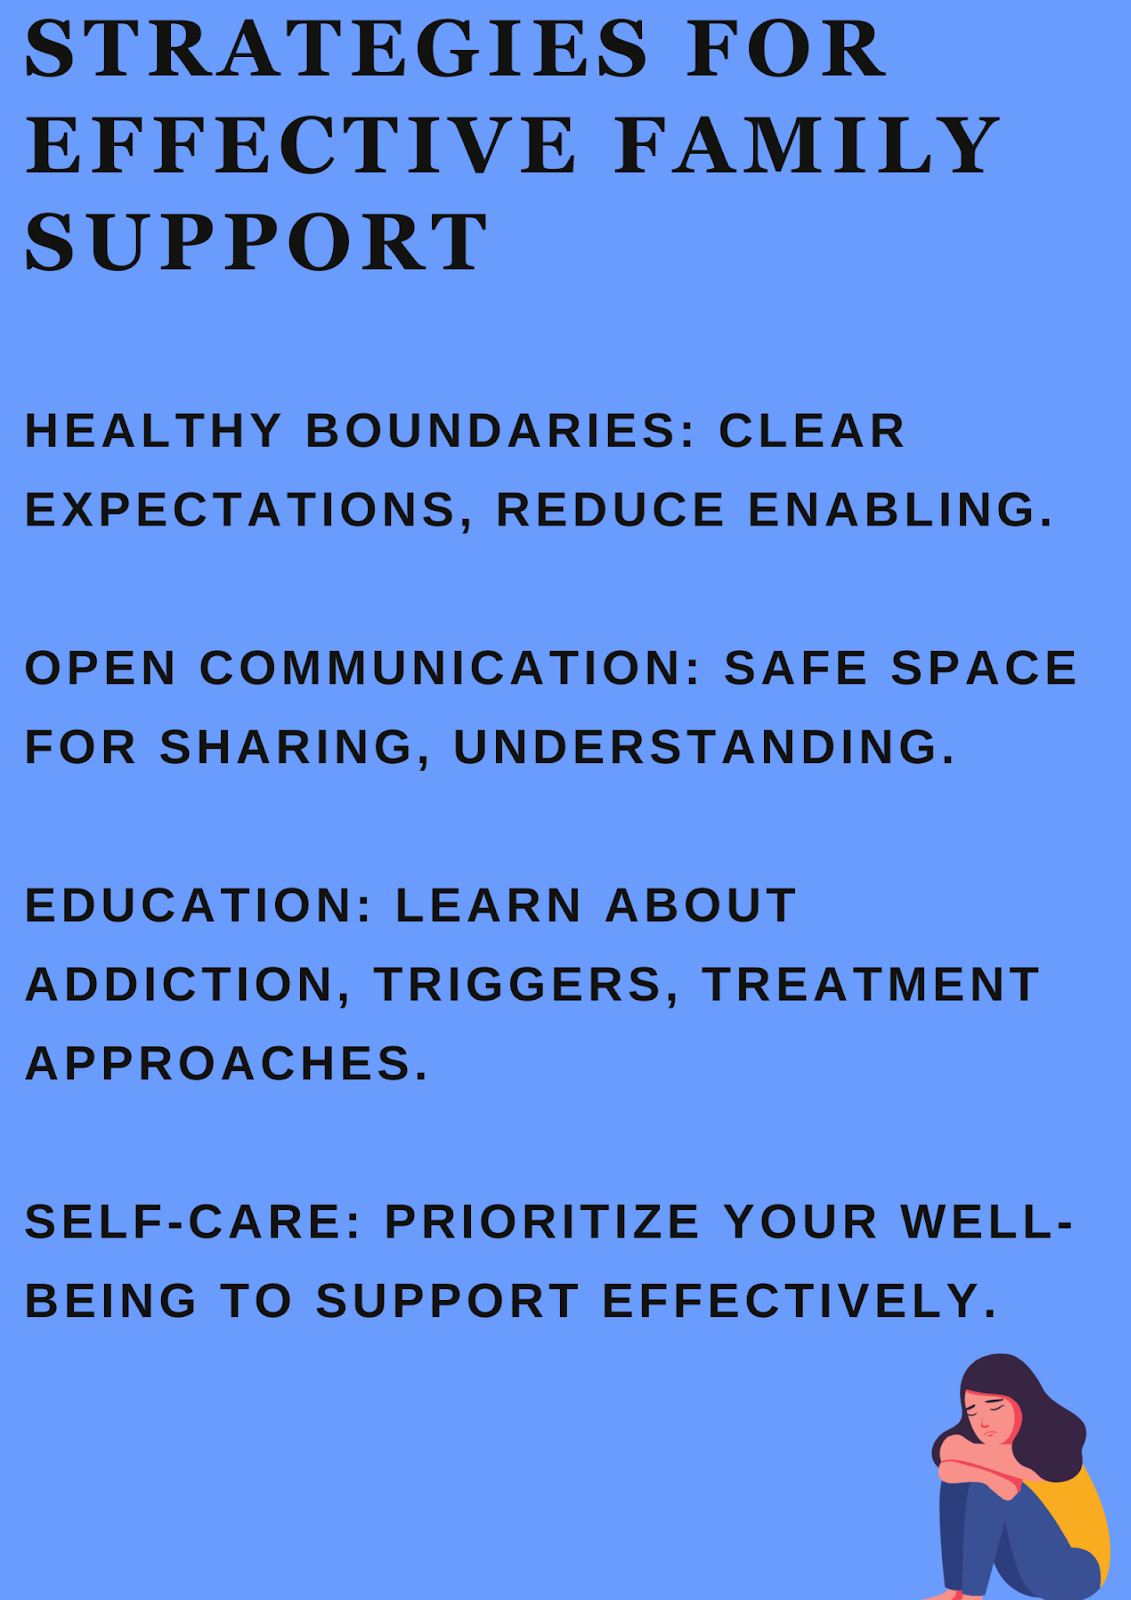 strategies for effective family support | family support in drug addiction